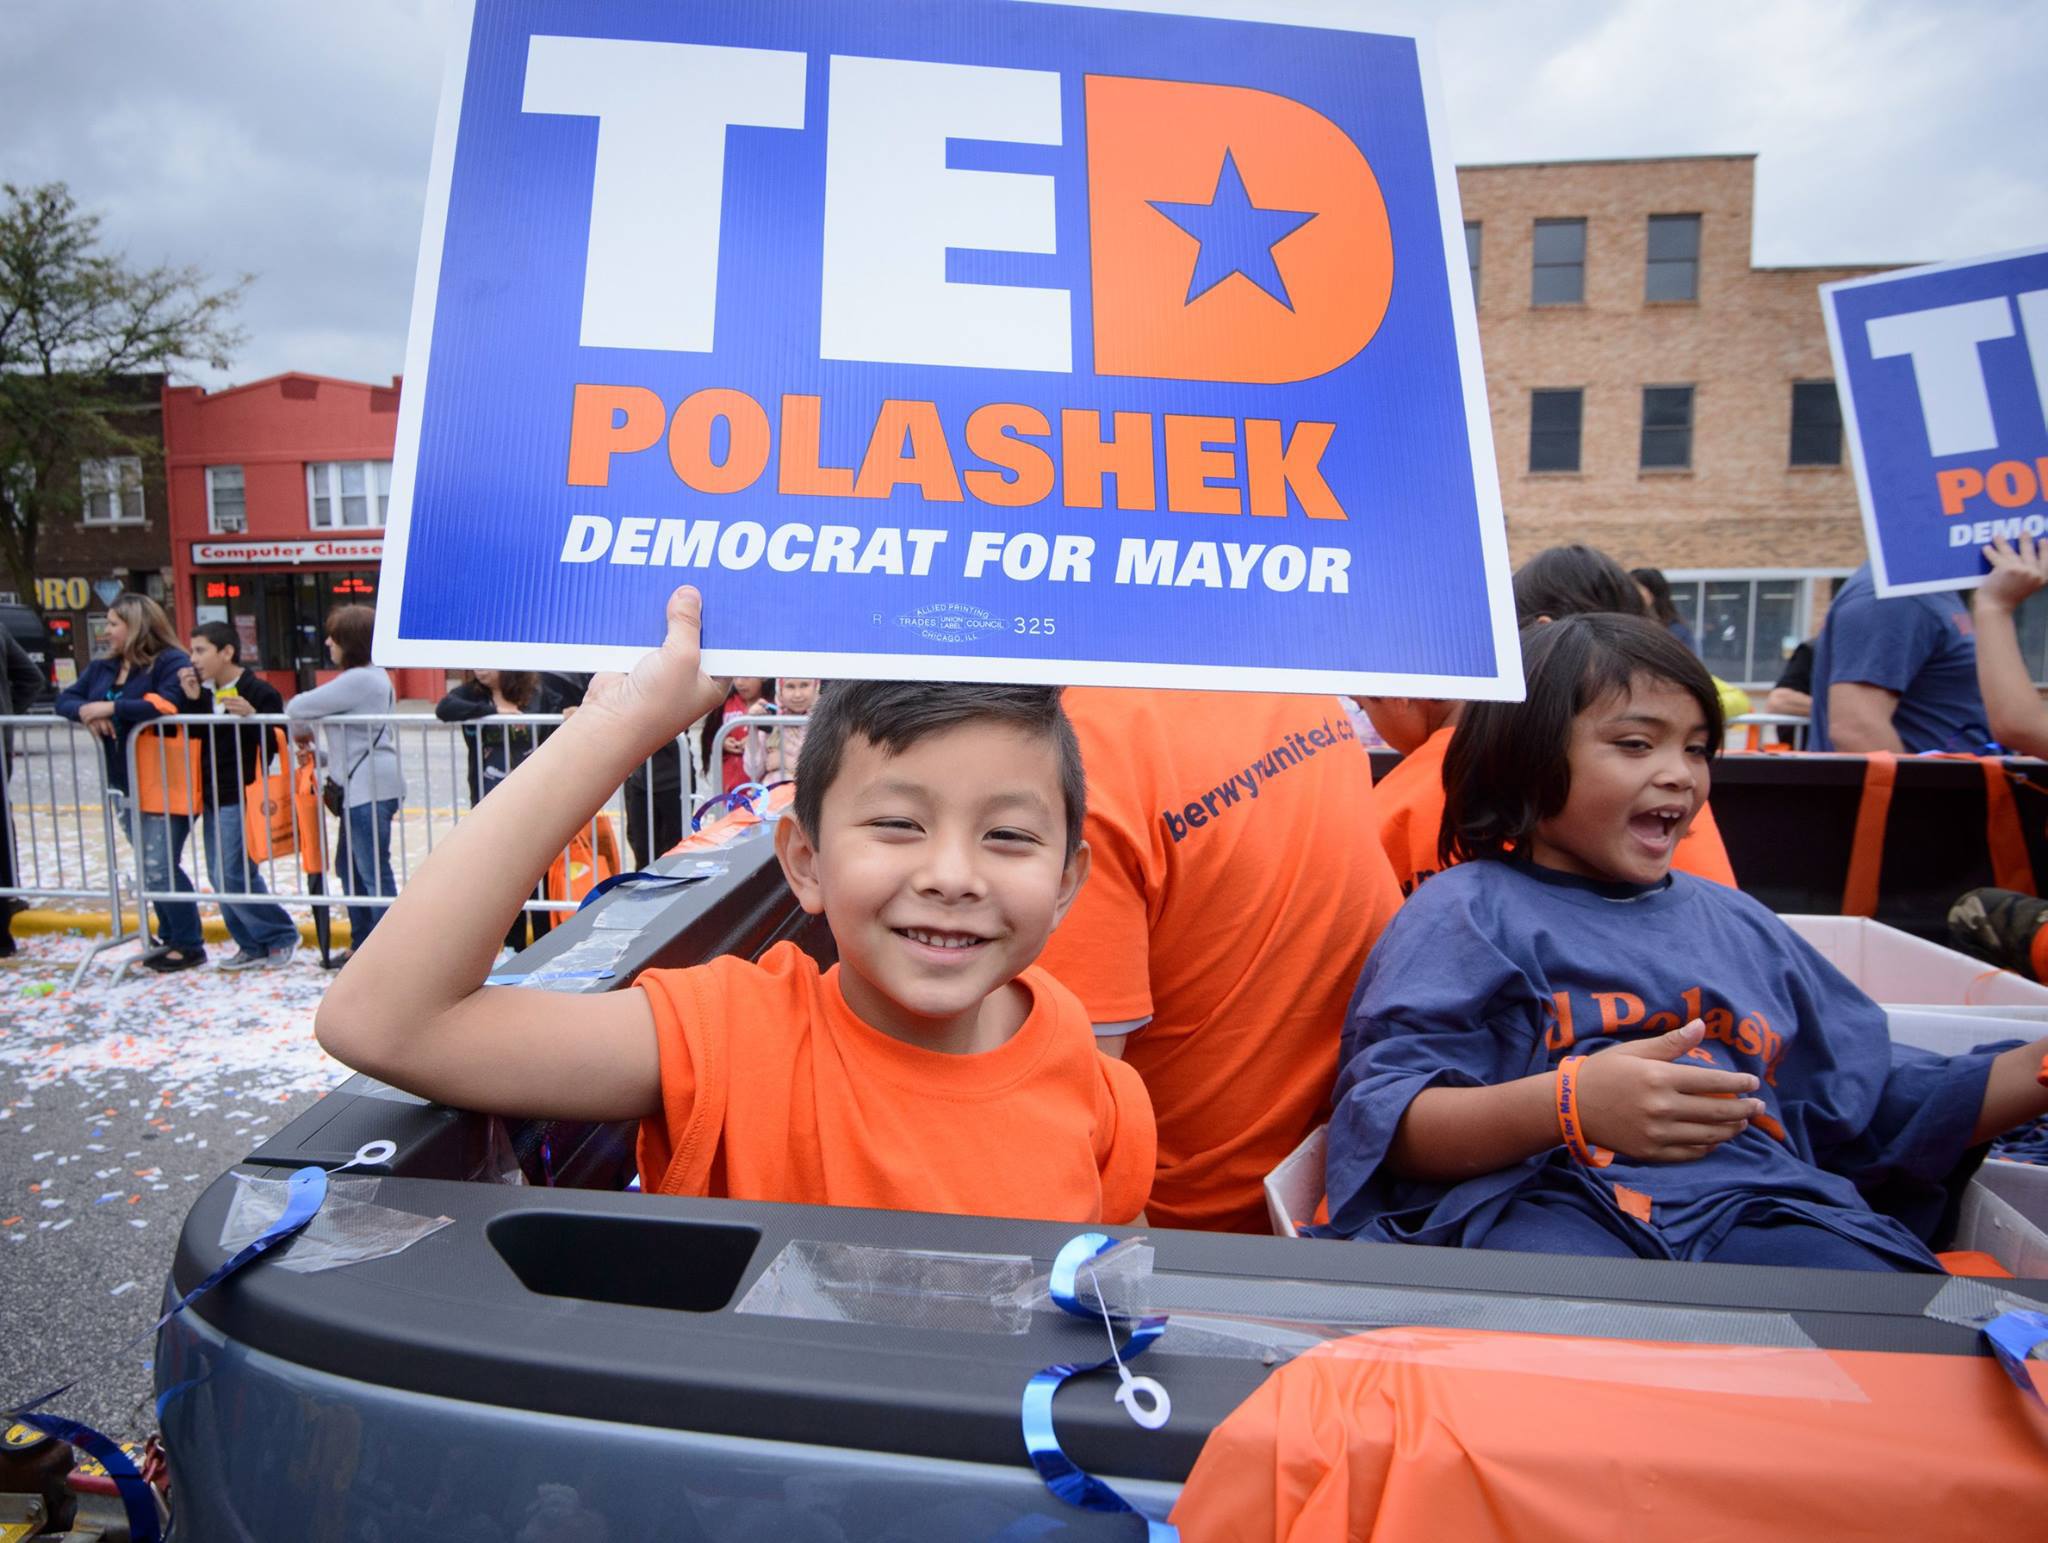 Boy riding in convertible holding campaign sign with campaign logo.